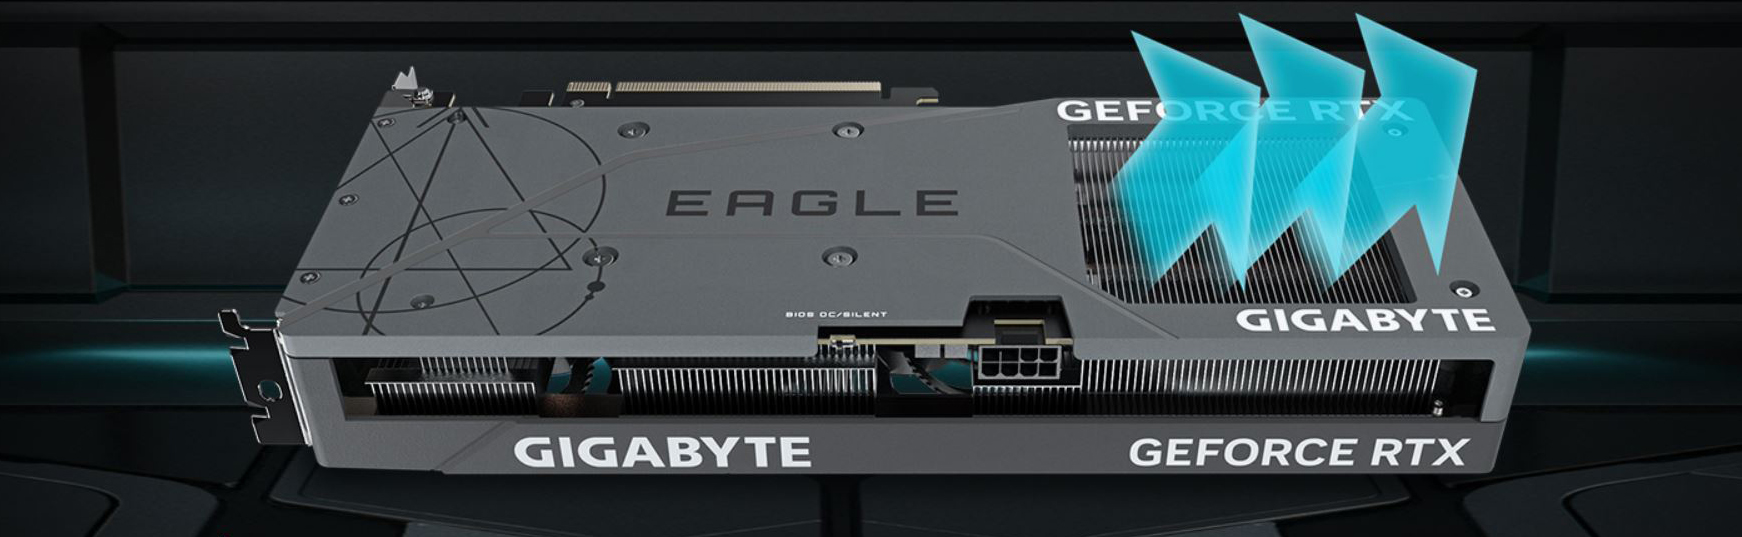 Build a PC for Video Graphic Card Gigabyte GeForce RTX 4060 Ti Eagle 8192MB  (GV-N406TEAGLE-8GD) with compatibility check and price analysis